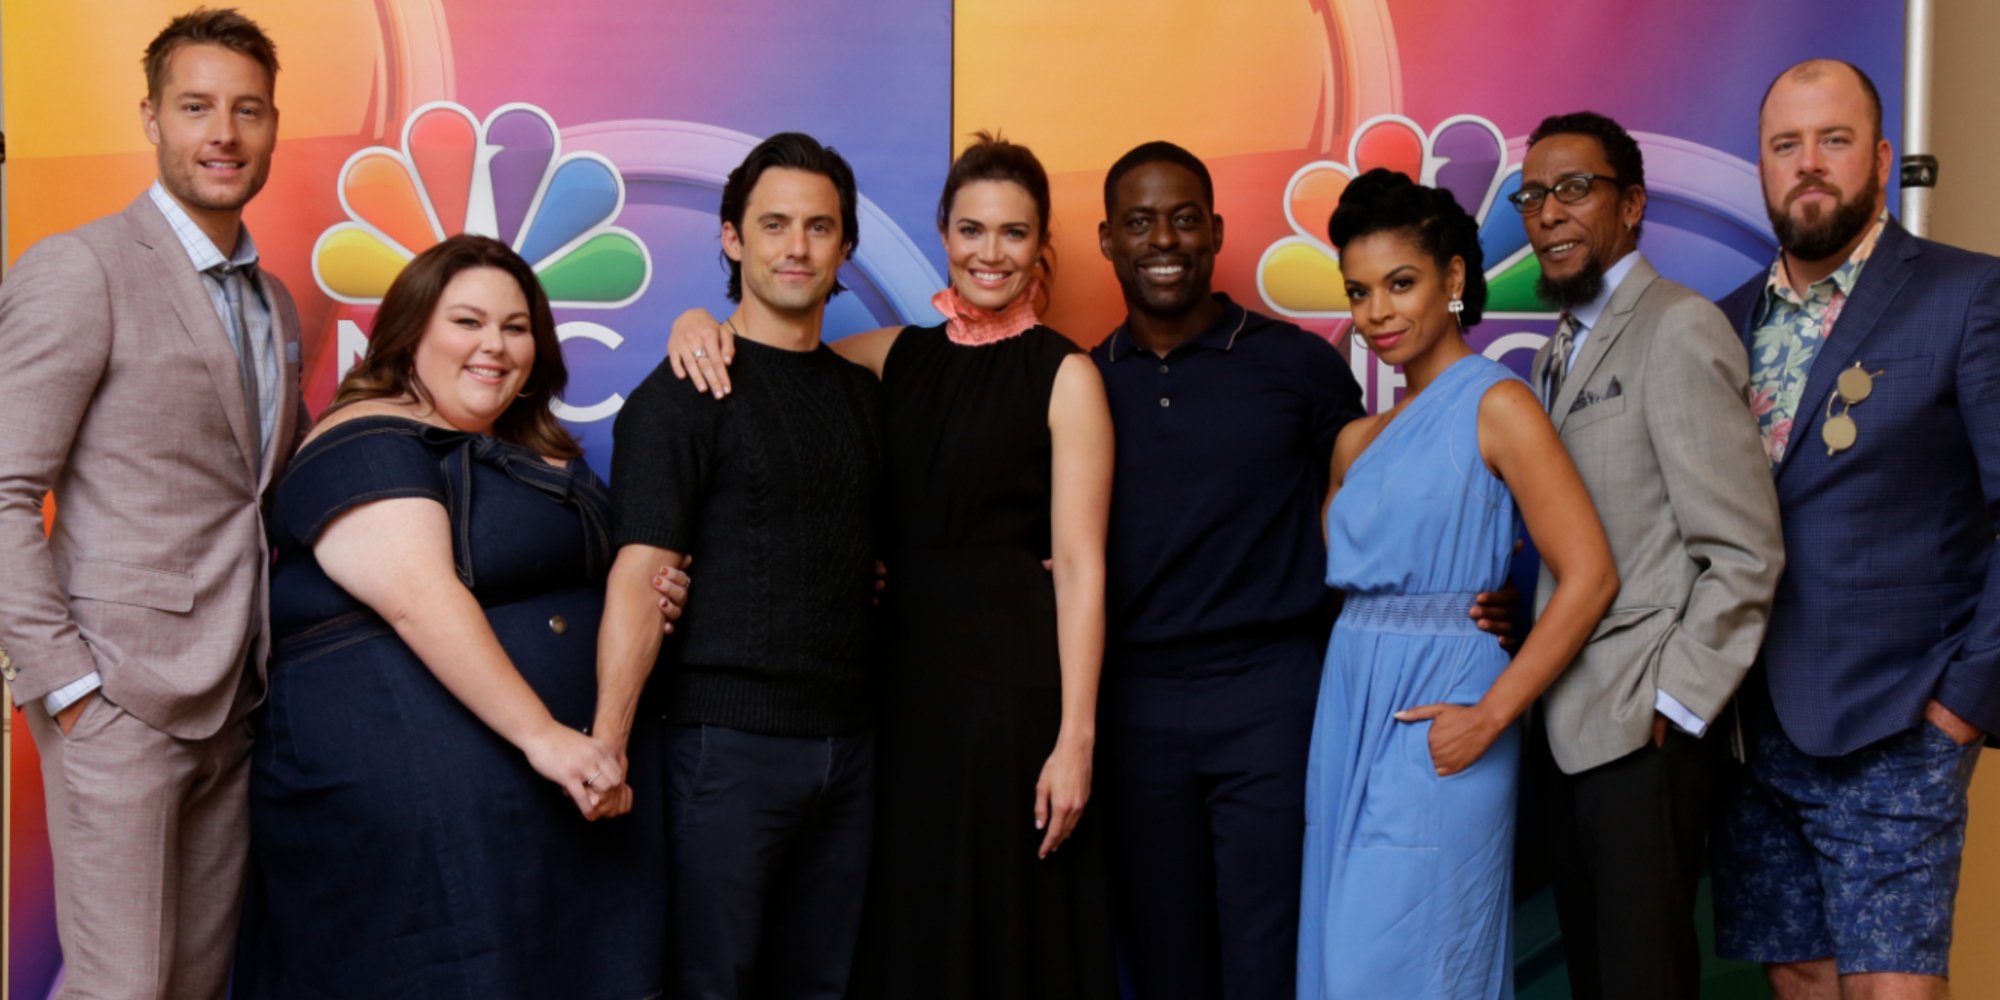 The cast of NBC's "This Is Us."